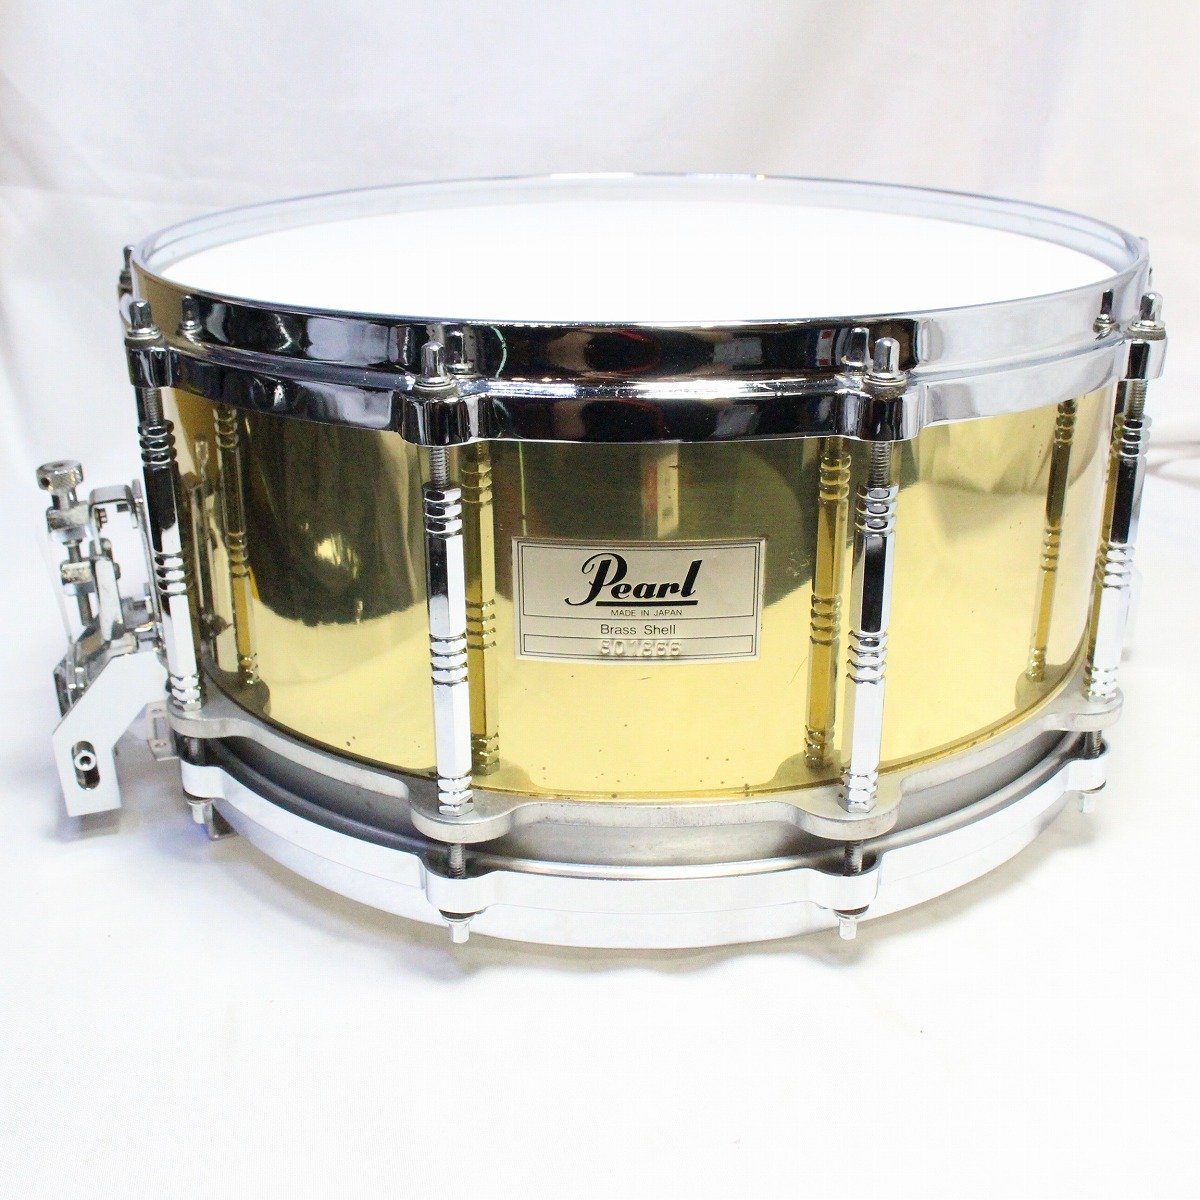 PEARL 6.5X14 BRASS SHELL SNARE DRUM SUPER GRIPPER SYSTEM B-714DX